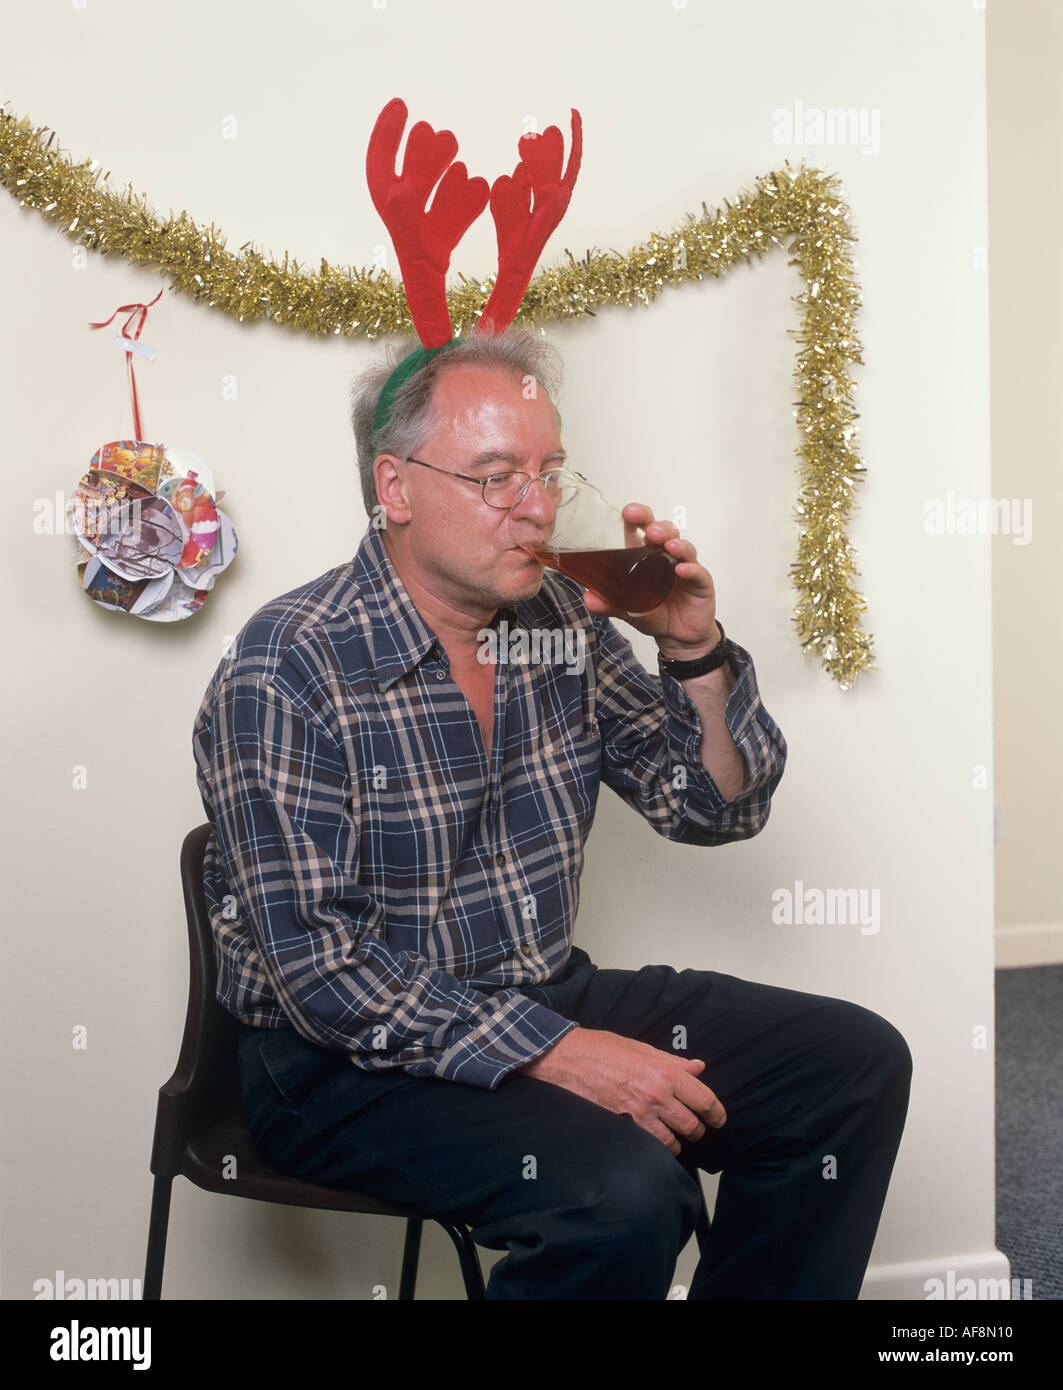 Man alone at Christmas party wearing antlers Stock Photo